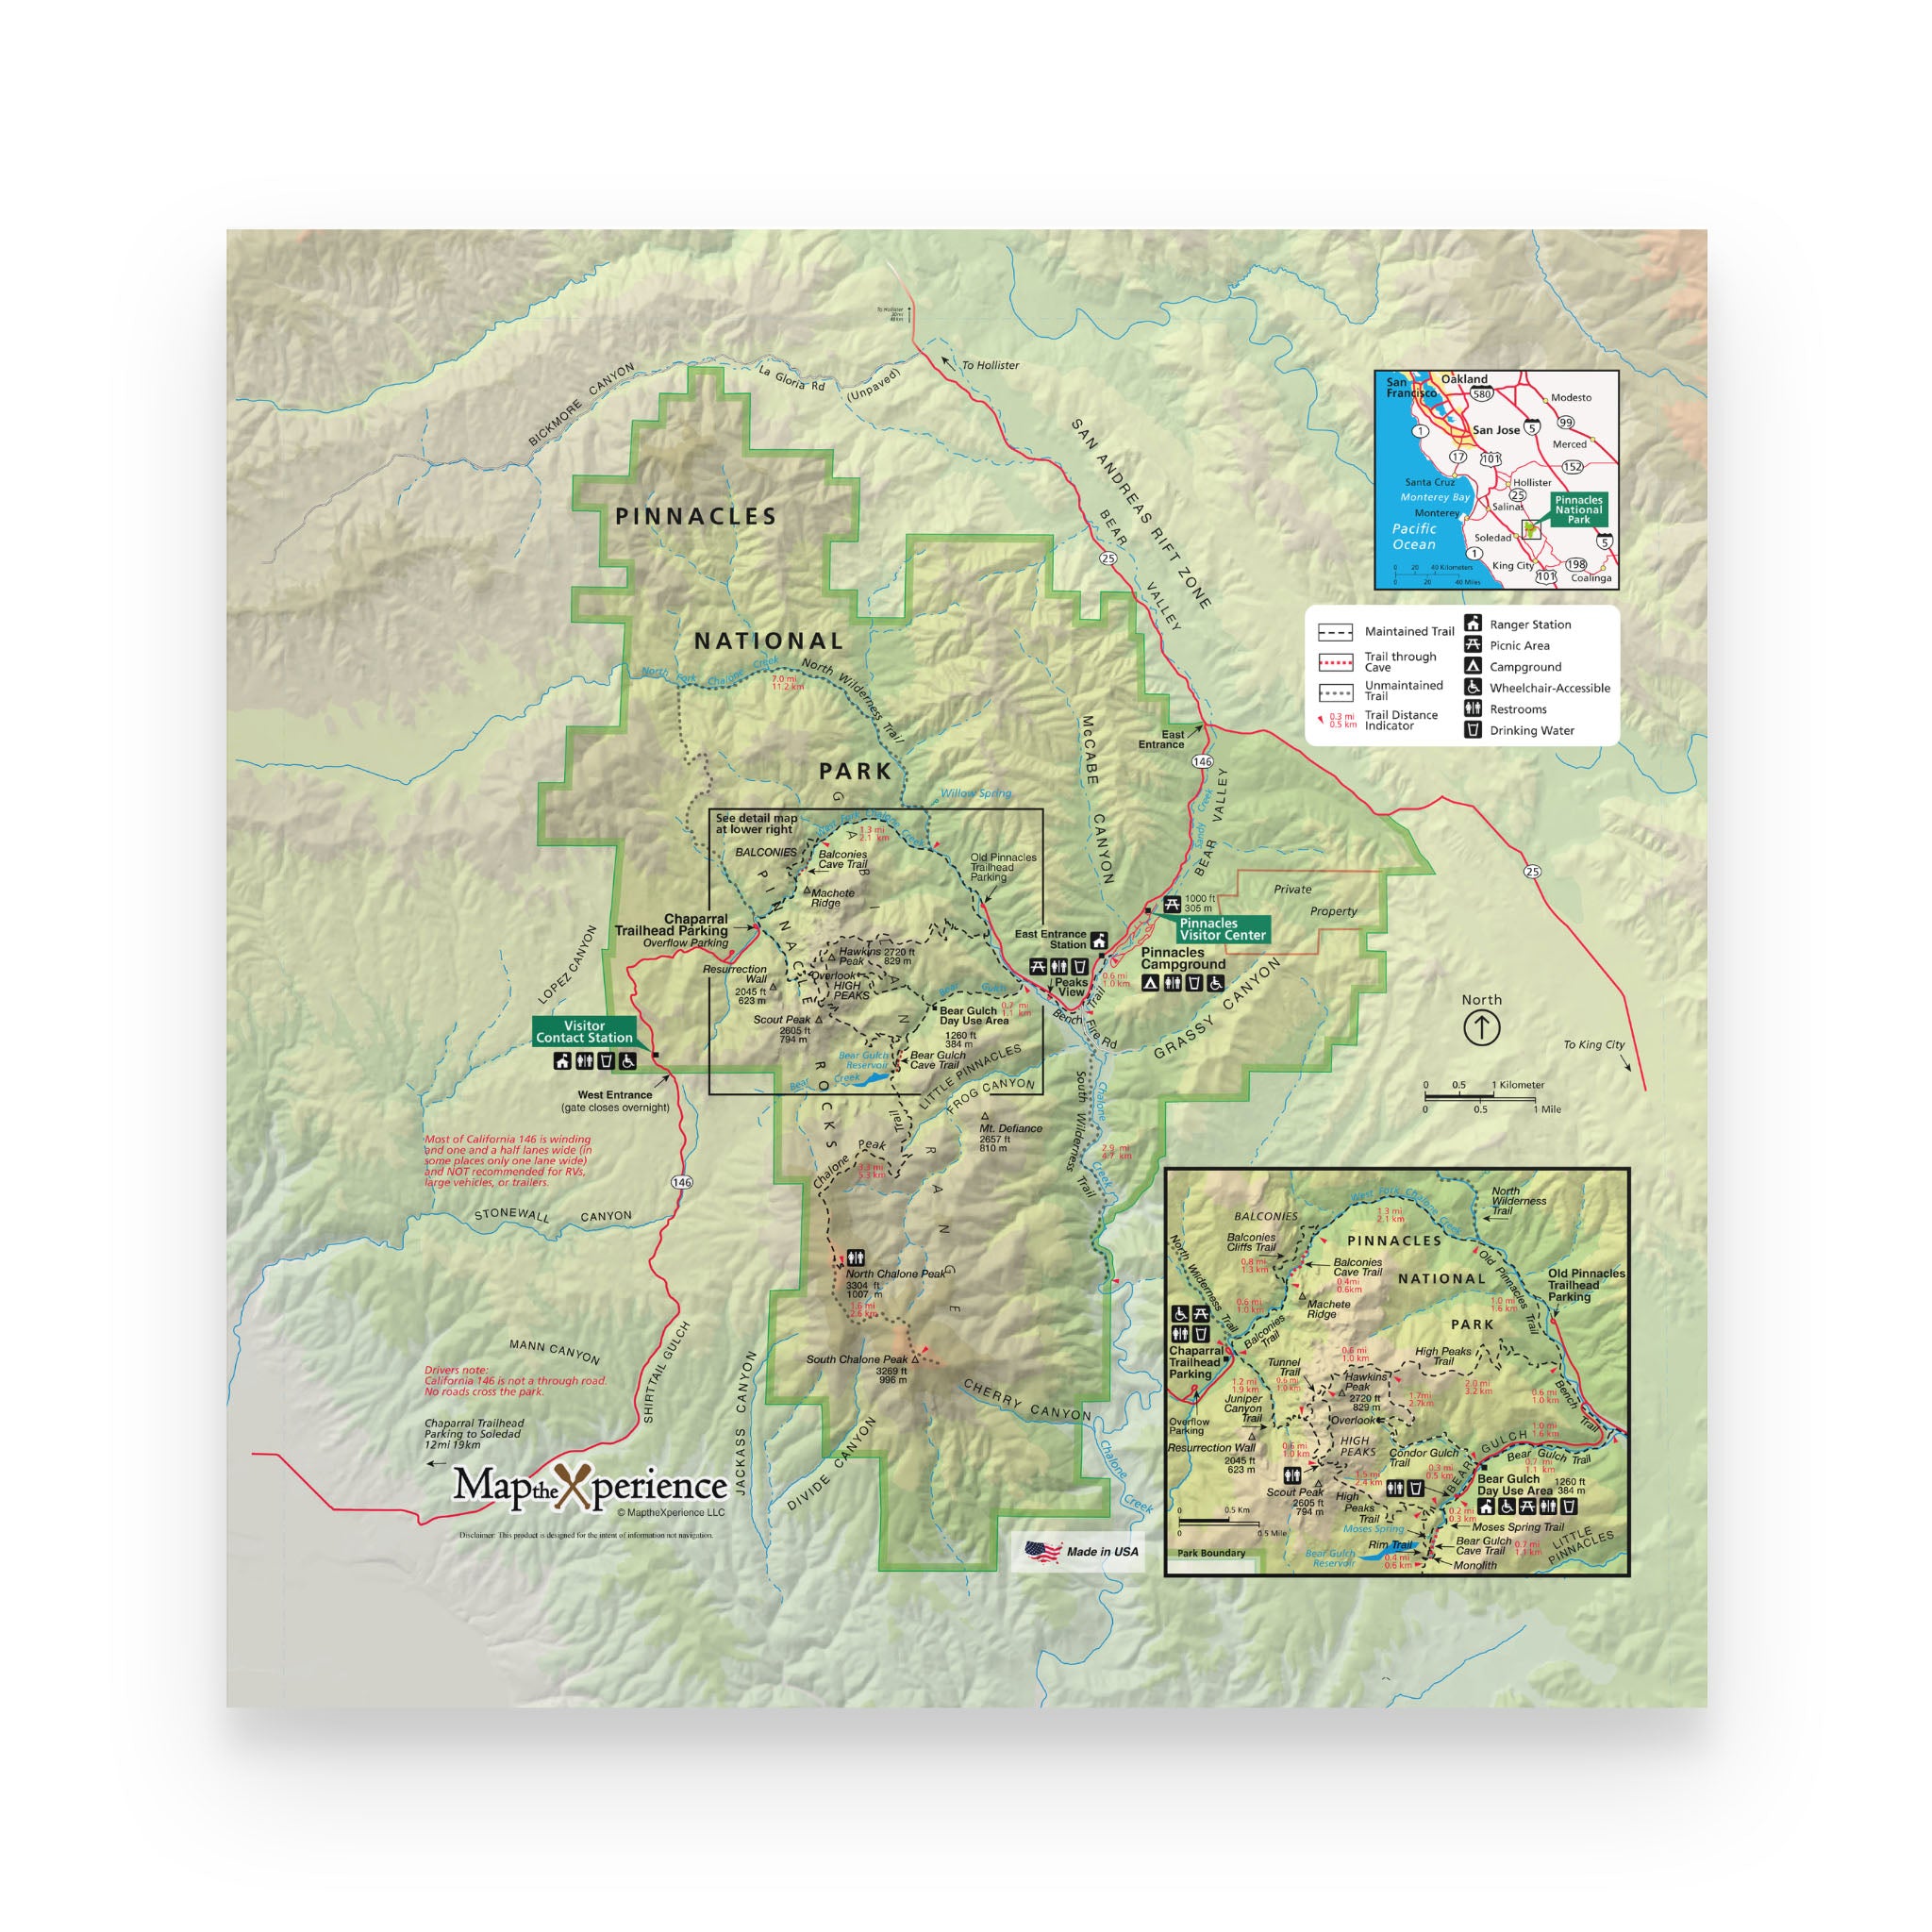 Pinnacles National Park Map Poster | Free Mobile Map